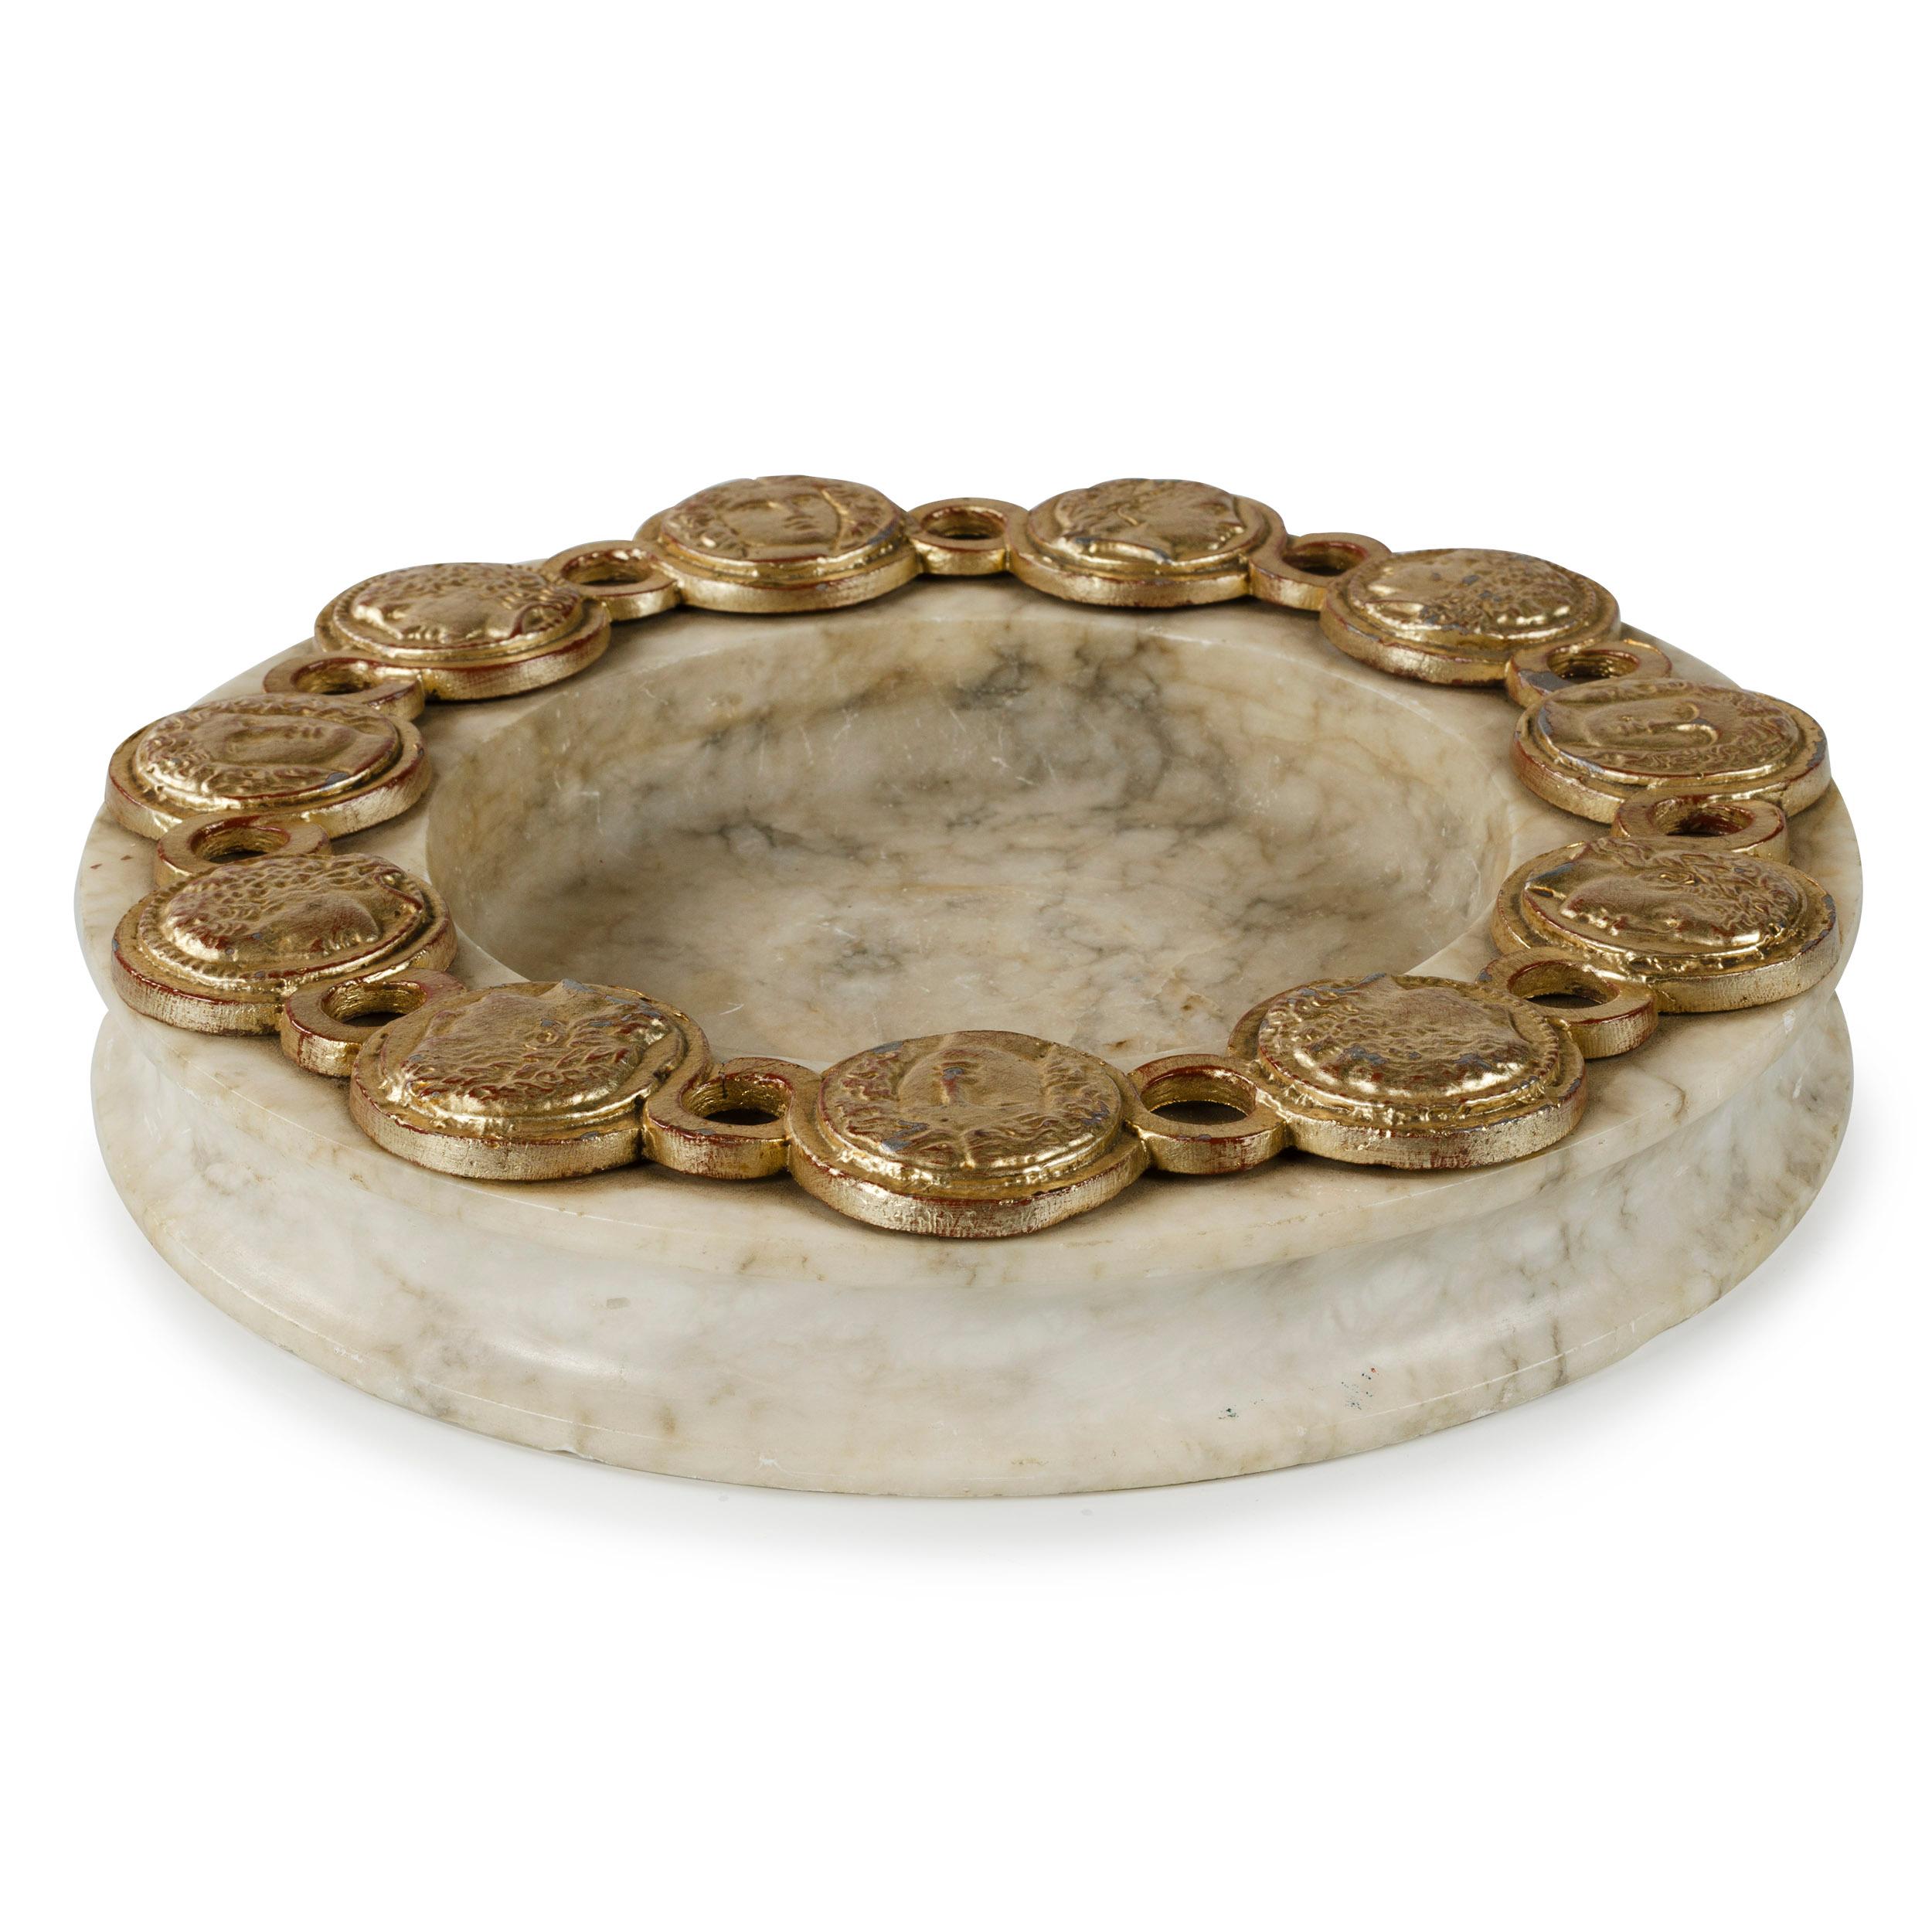 A Palladio marble ashtray encircled with gold painted cast aluminum coins, representing Greek and Roman figures.